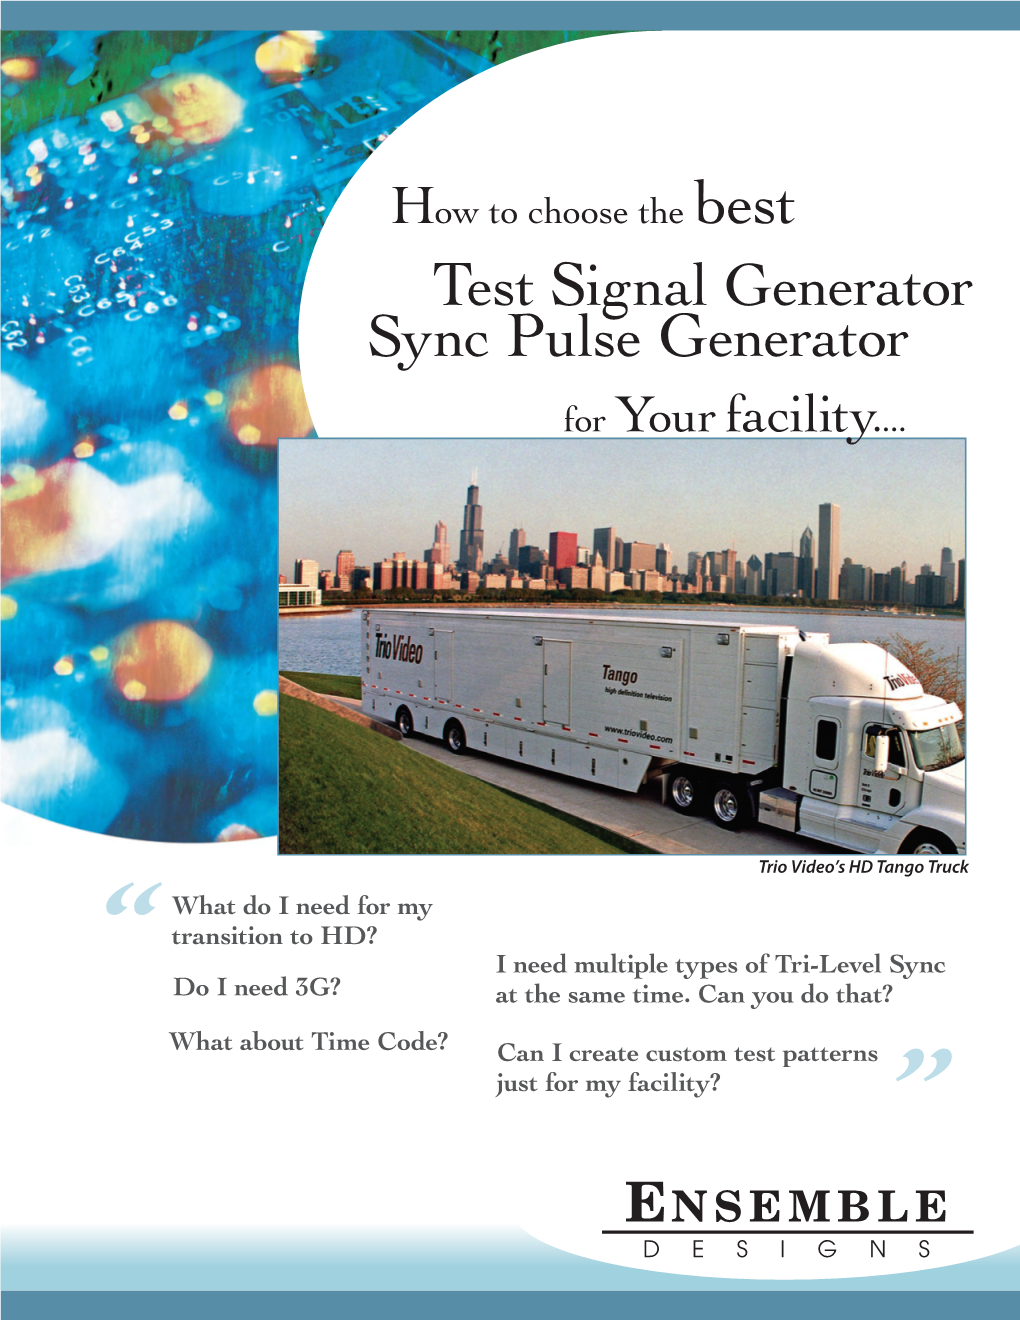 Sync Pulse and Test Signal Generators